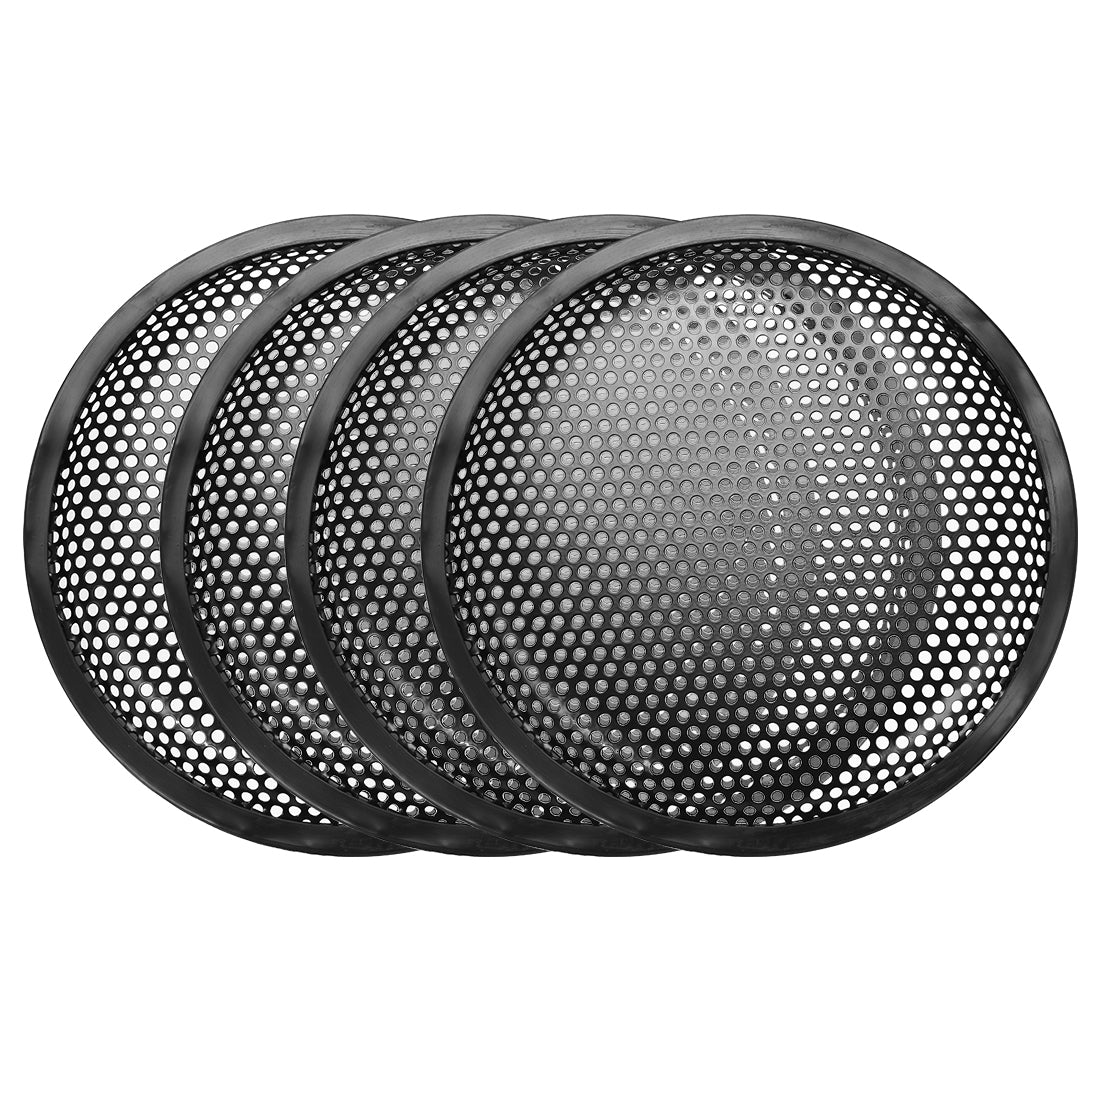 uxcell Uxcell 4pcs 8" Speaker Waffle Grill Metal Mesh Audio Subwoofer Guard Protector Cover with Clips,Screws